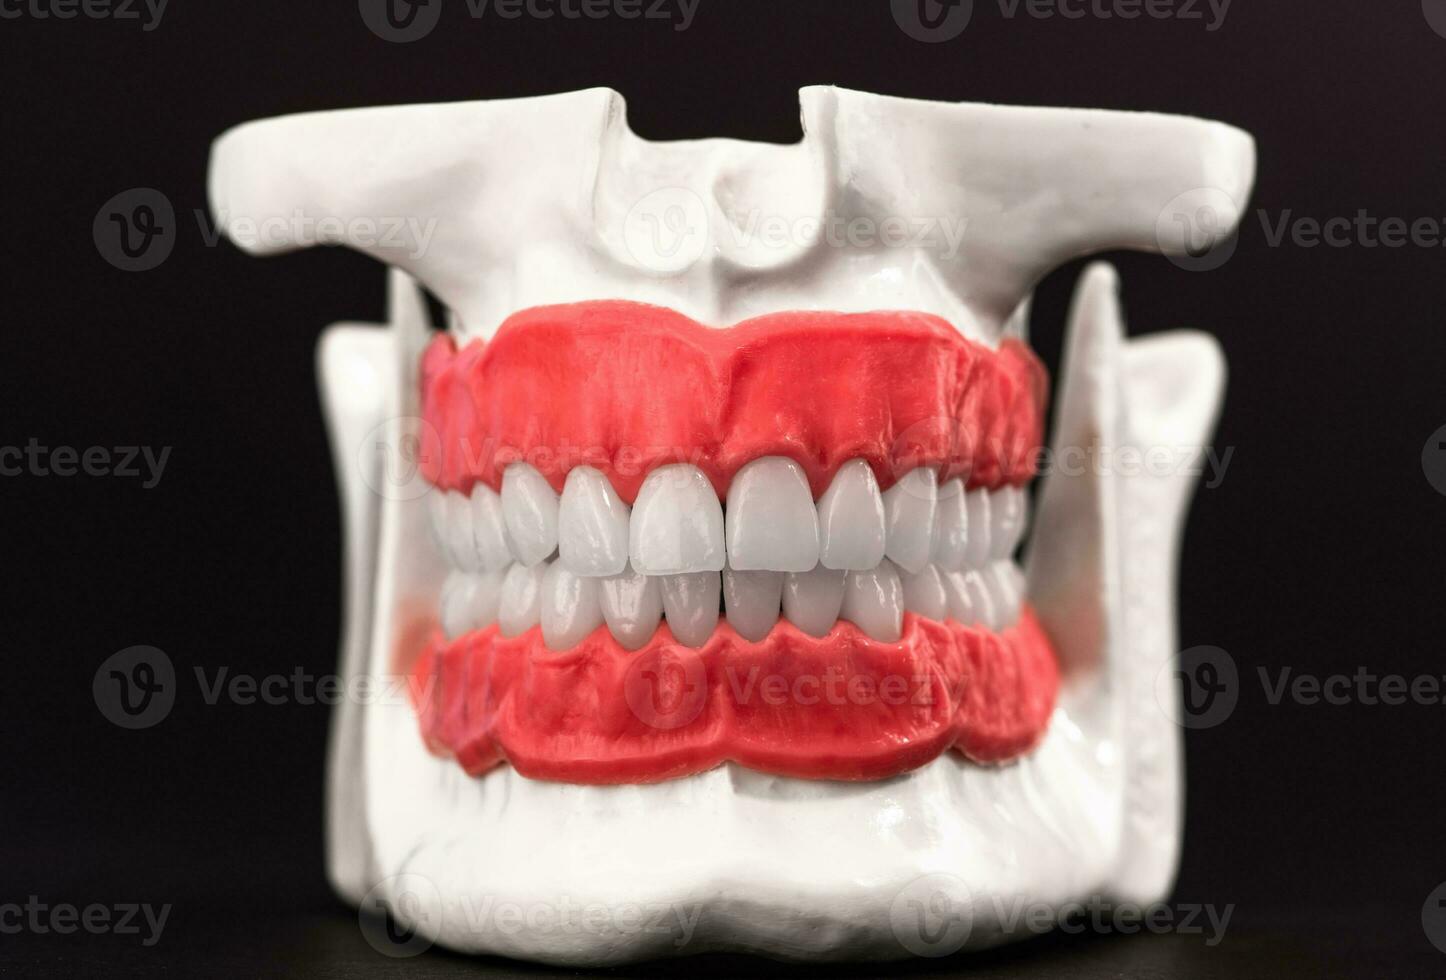 Human jaw with teeth and gums anatomy model isolated on blue background. Healthy teeth, dental care and orthodontic medical healthcare concept photo